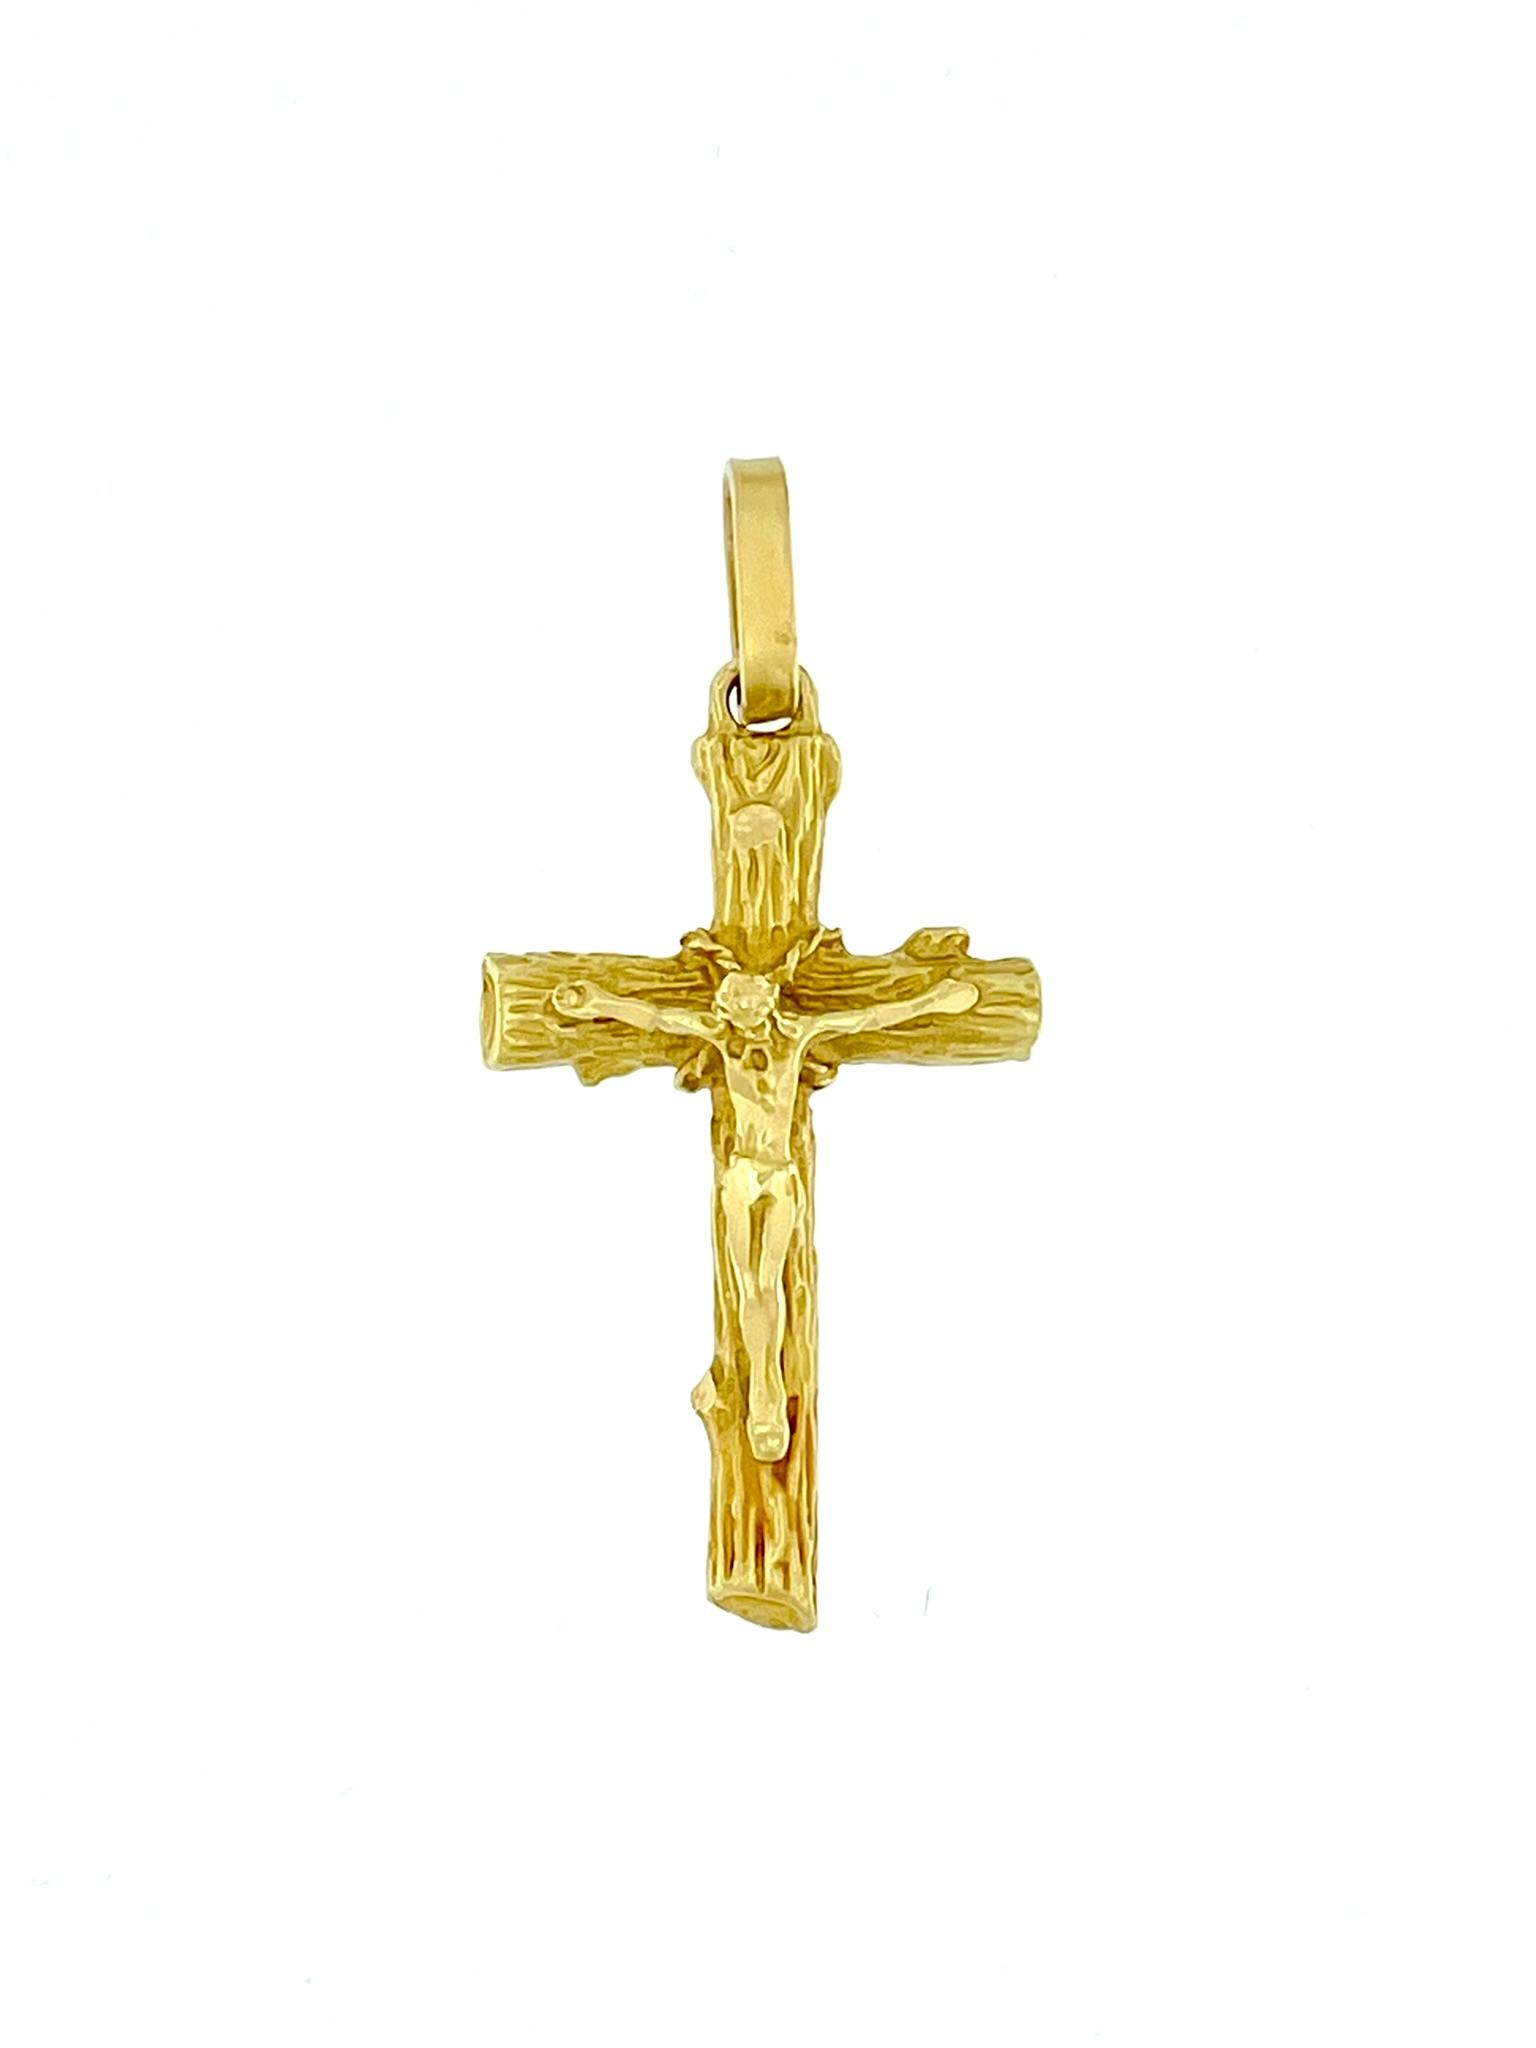 This Vintage Italian Crucifix is a captivating piece of religious jewelry crafted from lustrous 18-karat yellow gold. The crucifix stands out with its unique and intricate relief work, skillfully executed to resemble the texture of a tree trunk. The